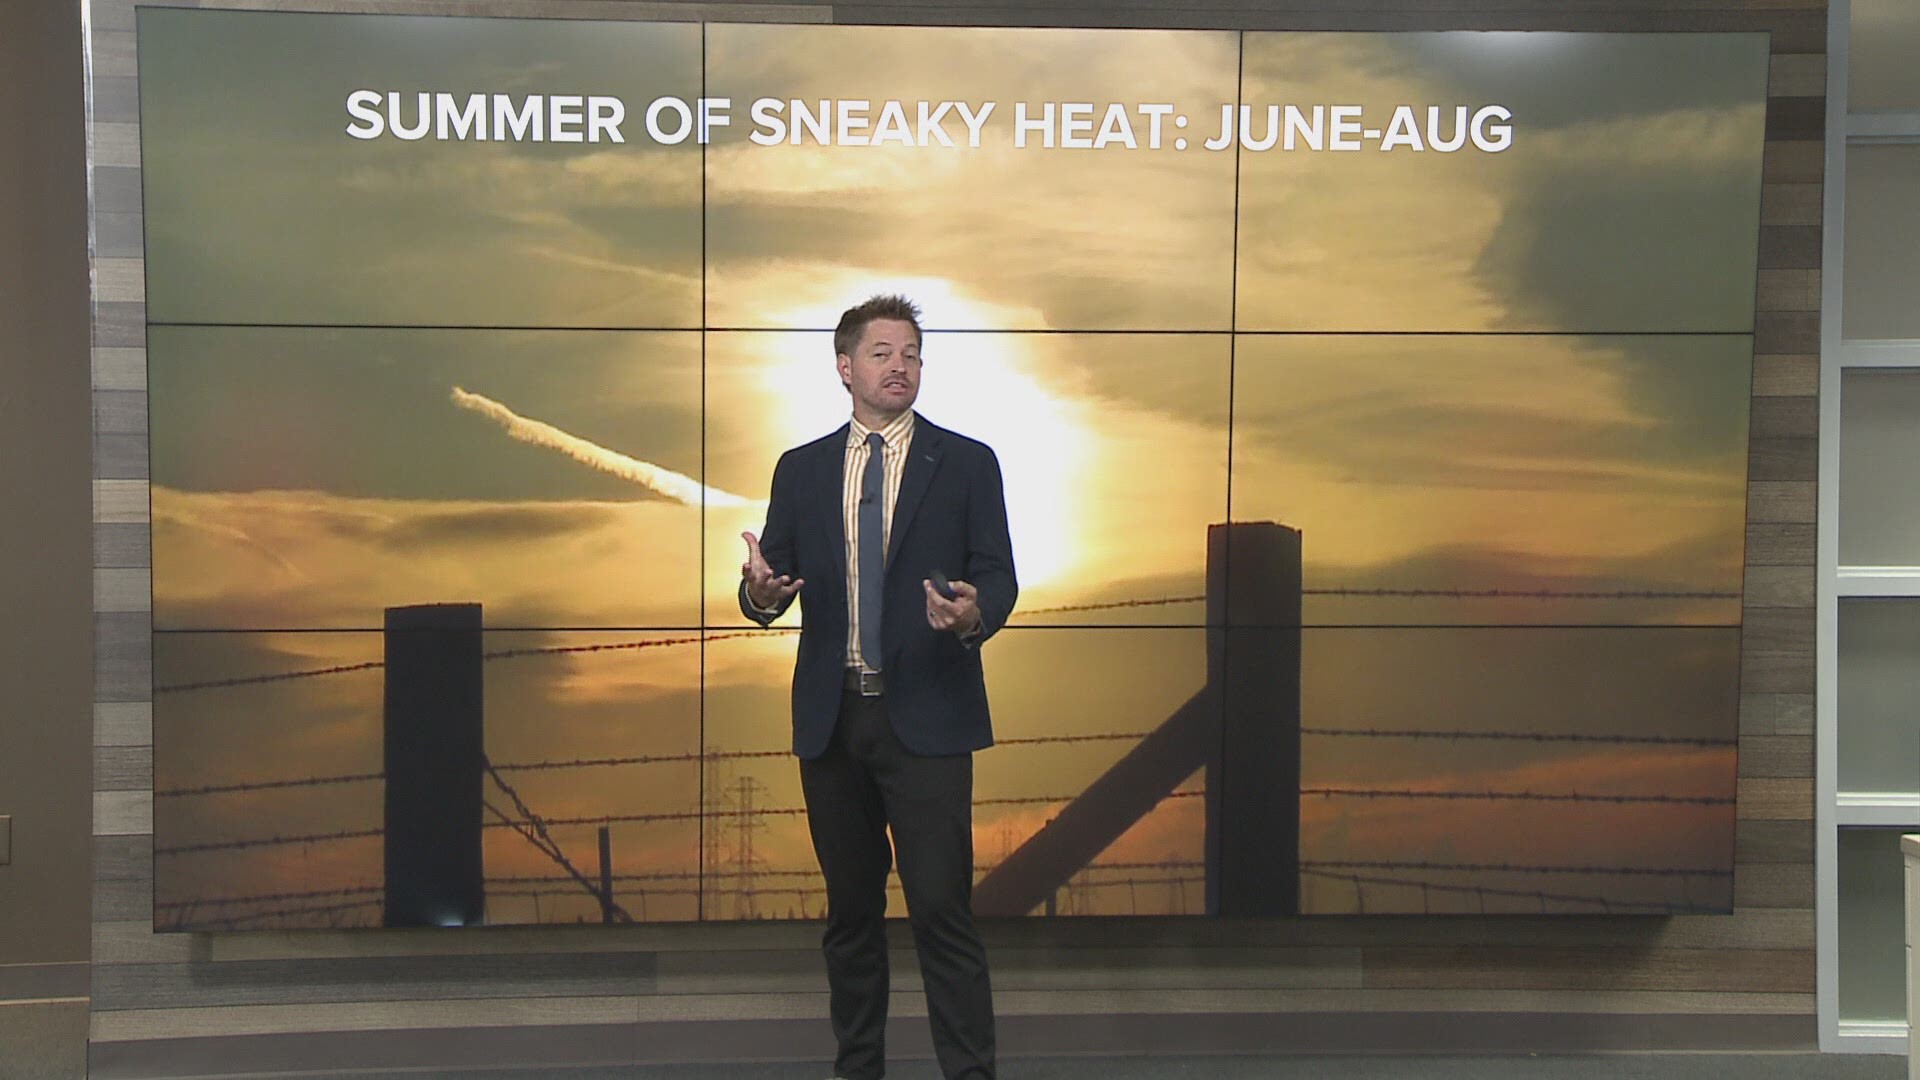 If you look at June-July-August and take the average 24 hour temperature, 2019 turns out it was one of the hottest summers on record at 76 degrees.